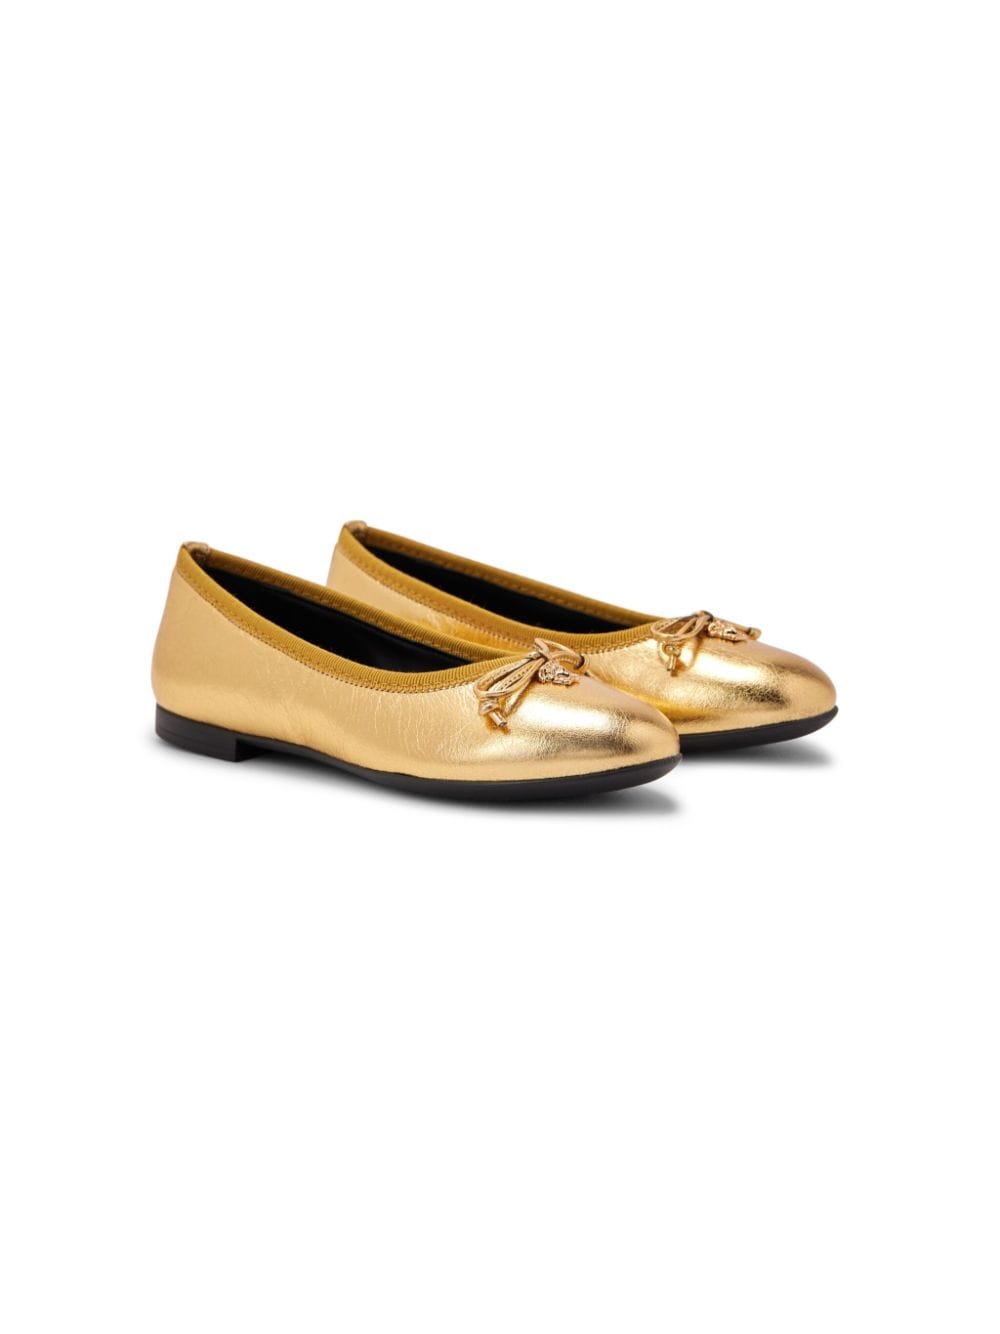 Metallic leather ballerina shoes<BR/><BR/><BR/>